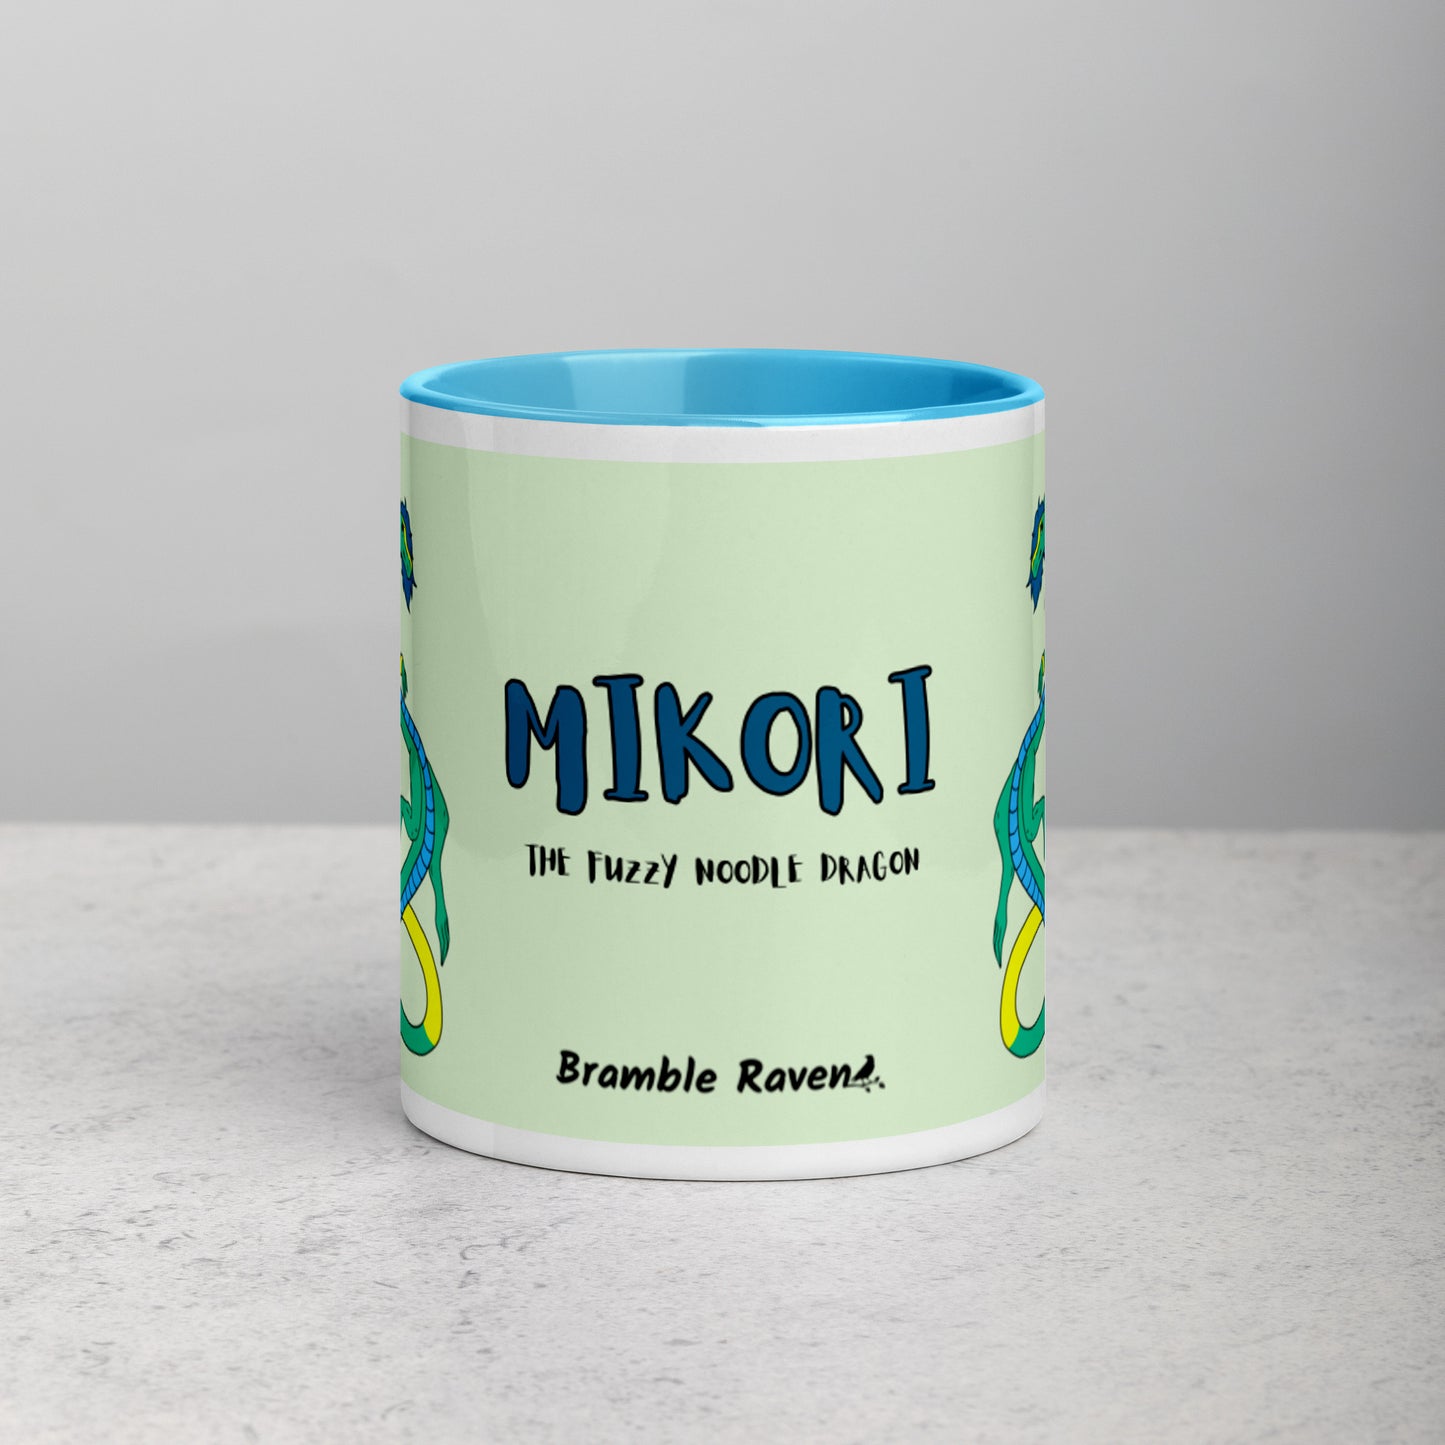 11 ounce white ceramic mug. Blue inside and handle. Features double-sided image of Mikori the Fuzzy Noodle Dragon. Shown on tabletop. Front view shows Mikori the Fuzzy Noodle Dragon text and Bramble Raven logo.